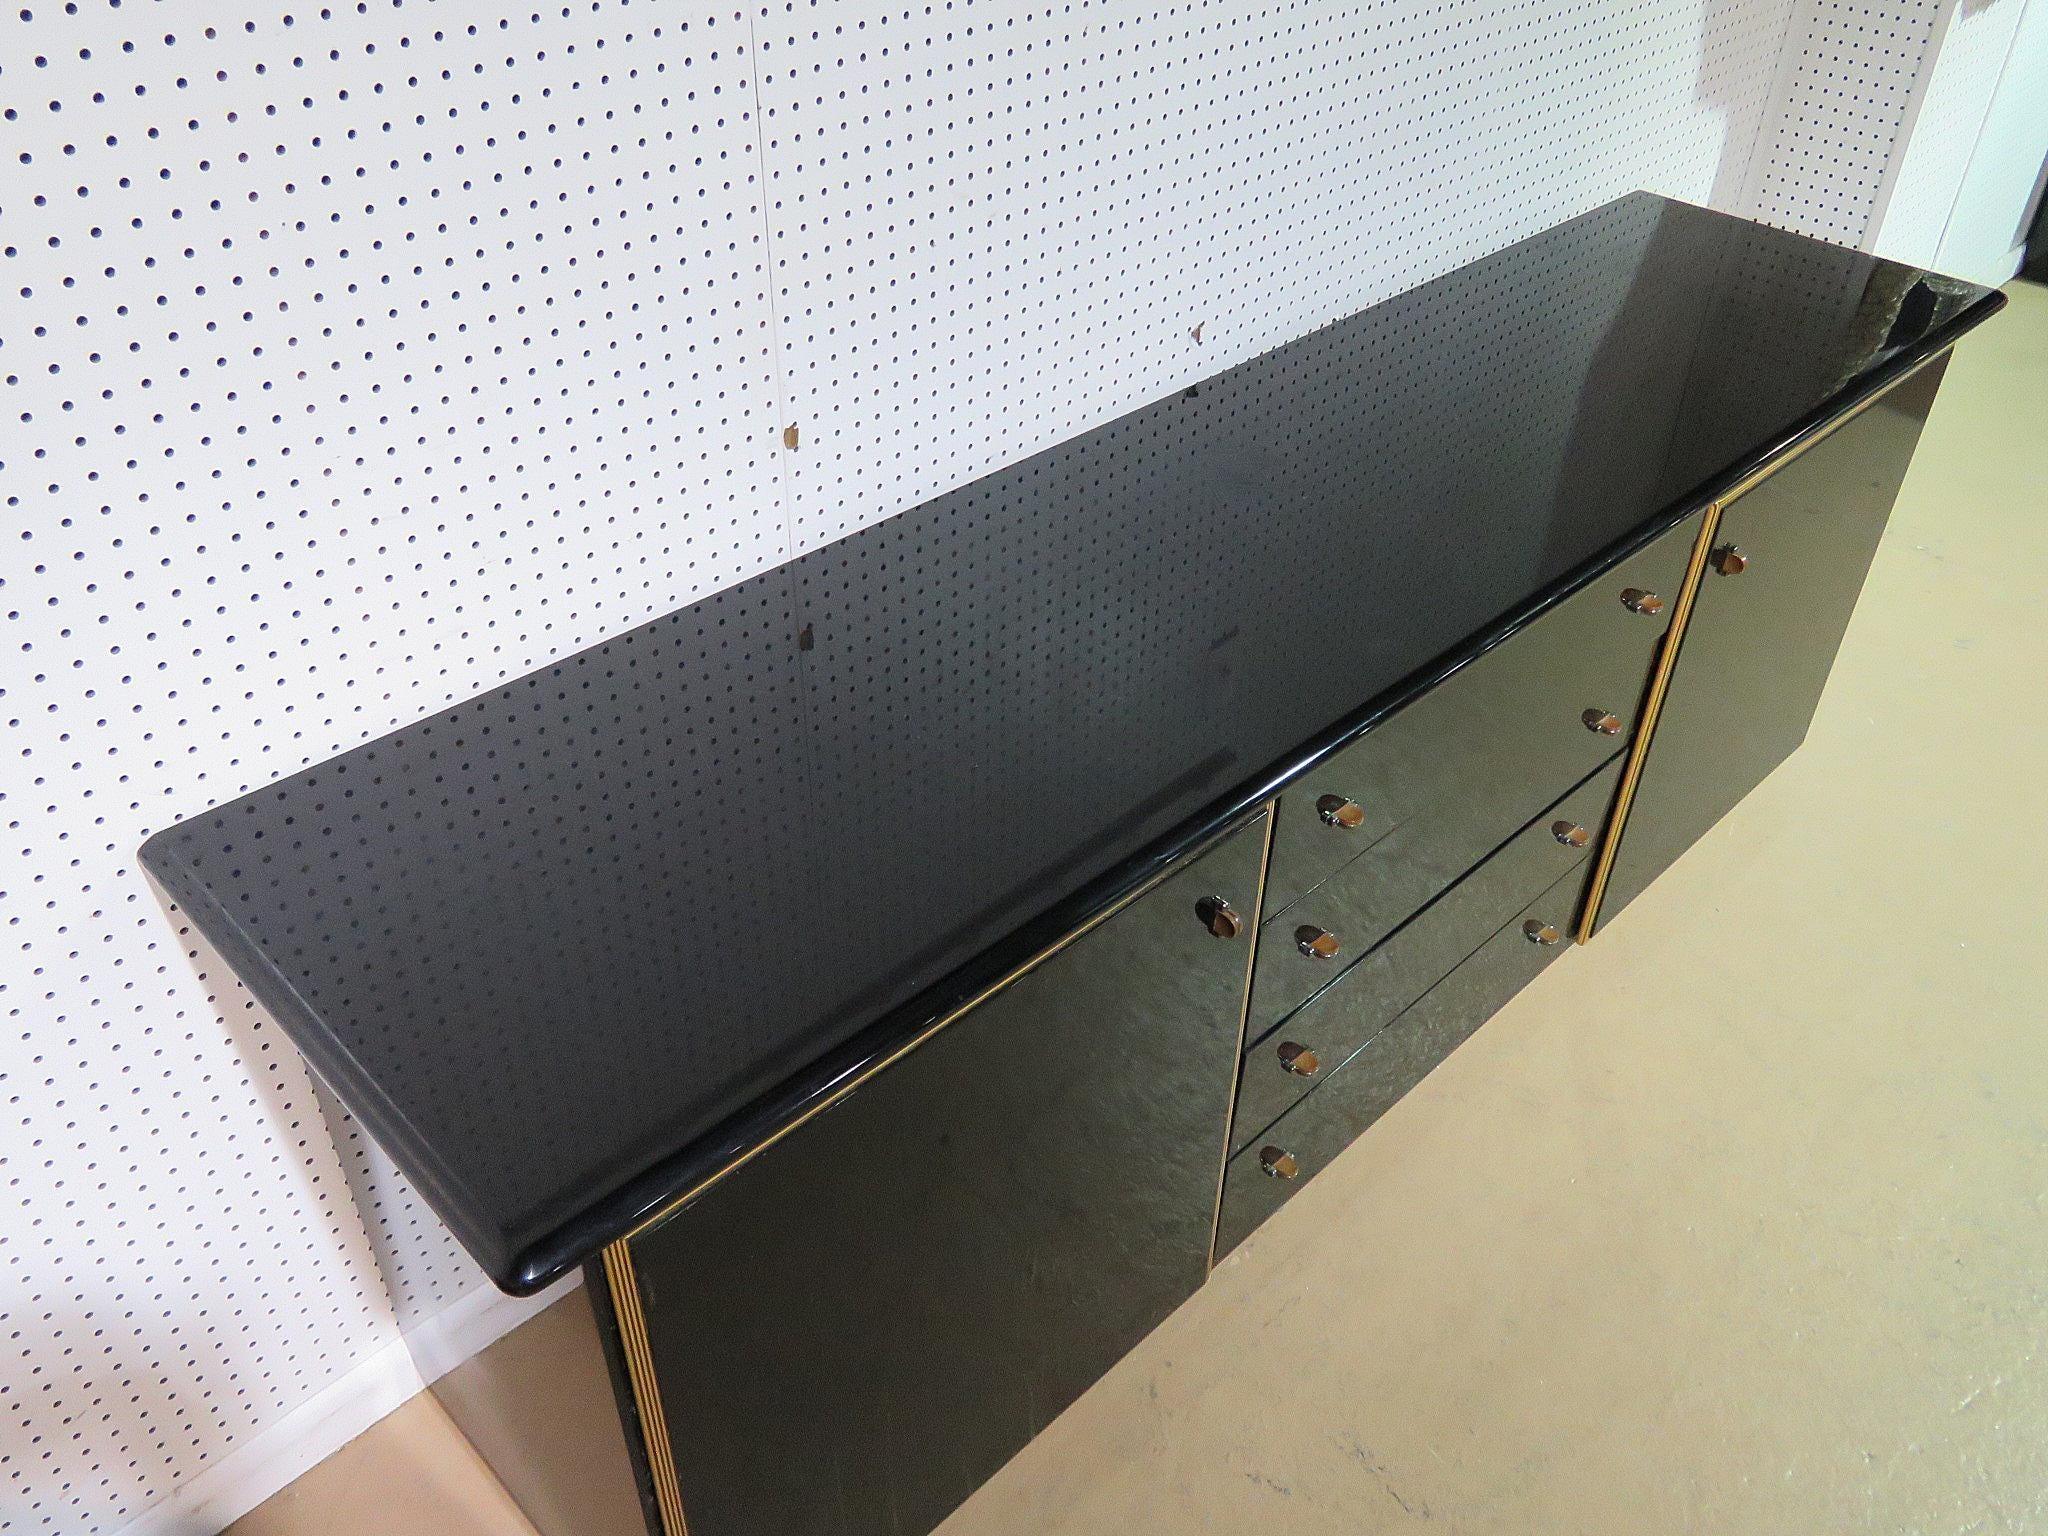 Mid-Century Modern sideboard with black polished finish and blonde wood trim.
(Please confirm item location - NY or NJ - with dealer).
   